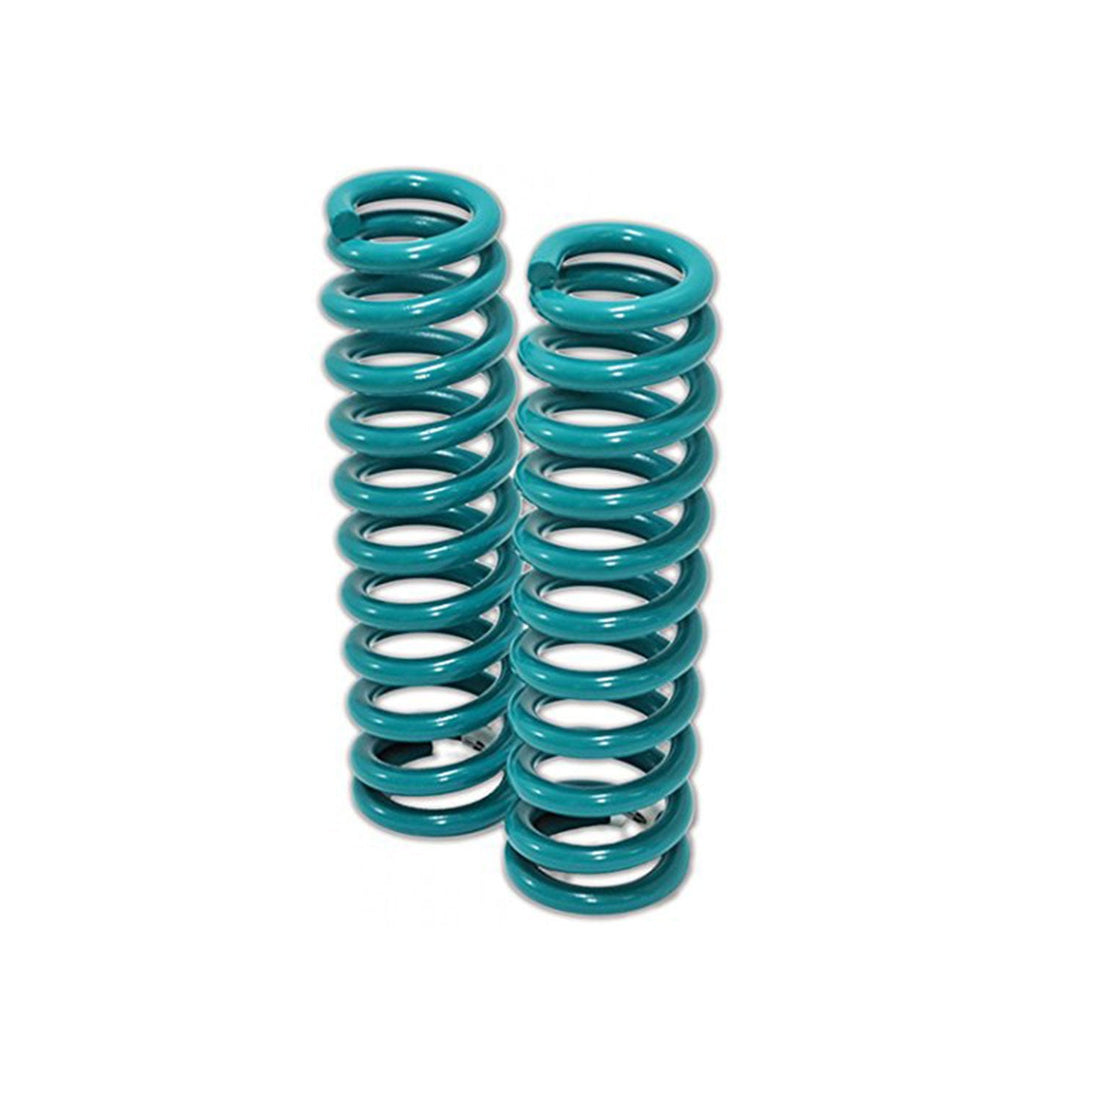 Dobinsons Rear Coil Springs for Toyota Land Cruiser 80 series 1990-1997 6" Lift linear Rate with 880LBS Load(C59-311)